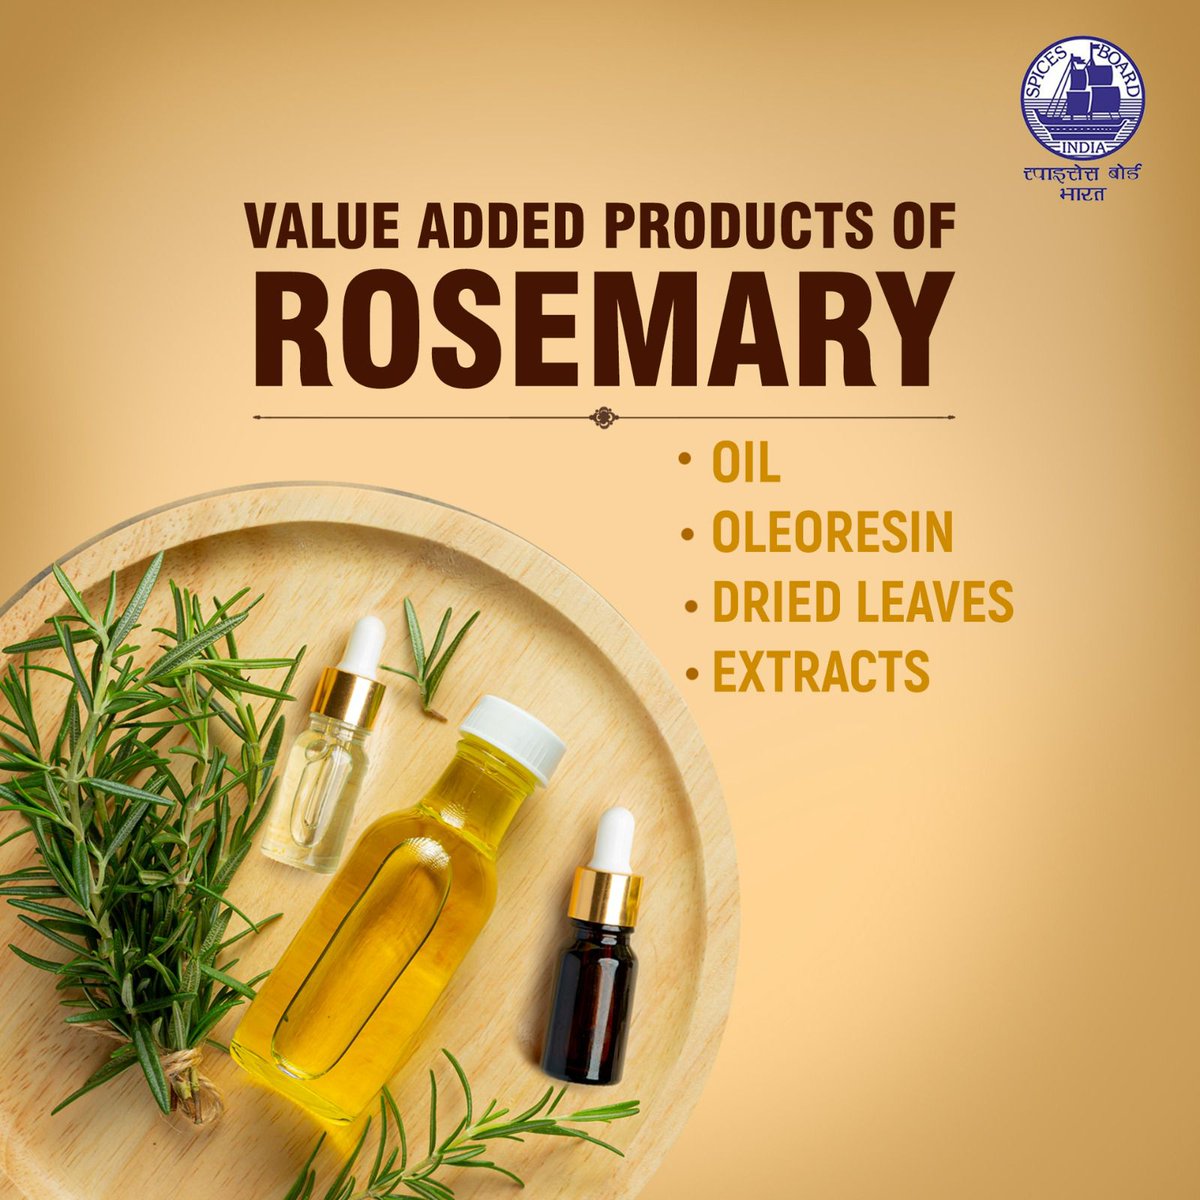 Discover the range of value-added products made from rosemary @doc_goi #spicesboard #rosemary #incrediblespicesofindia